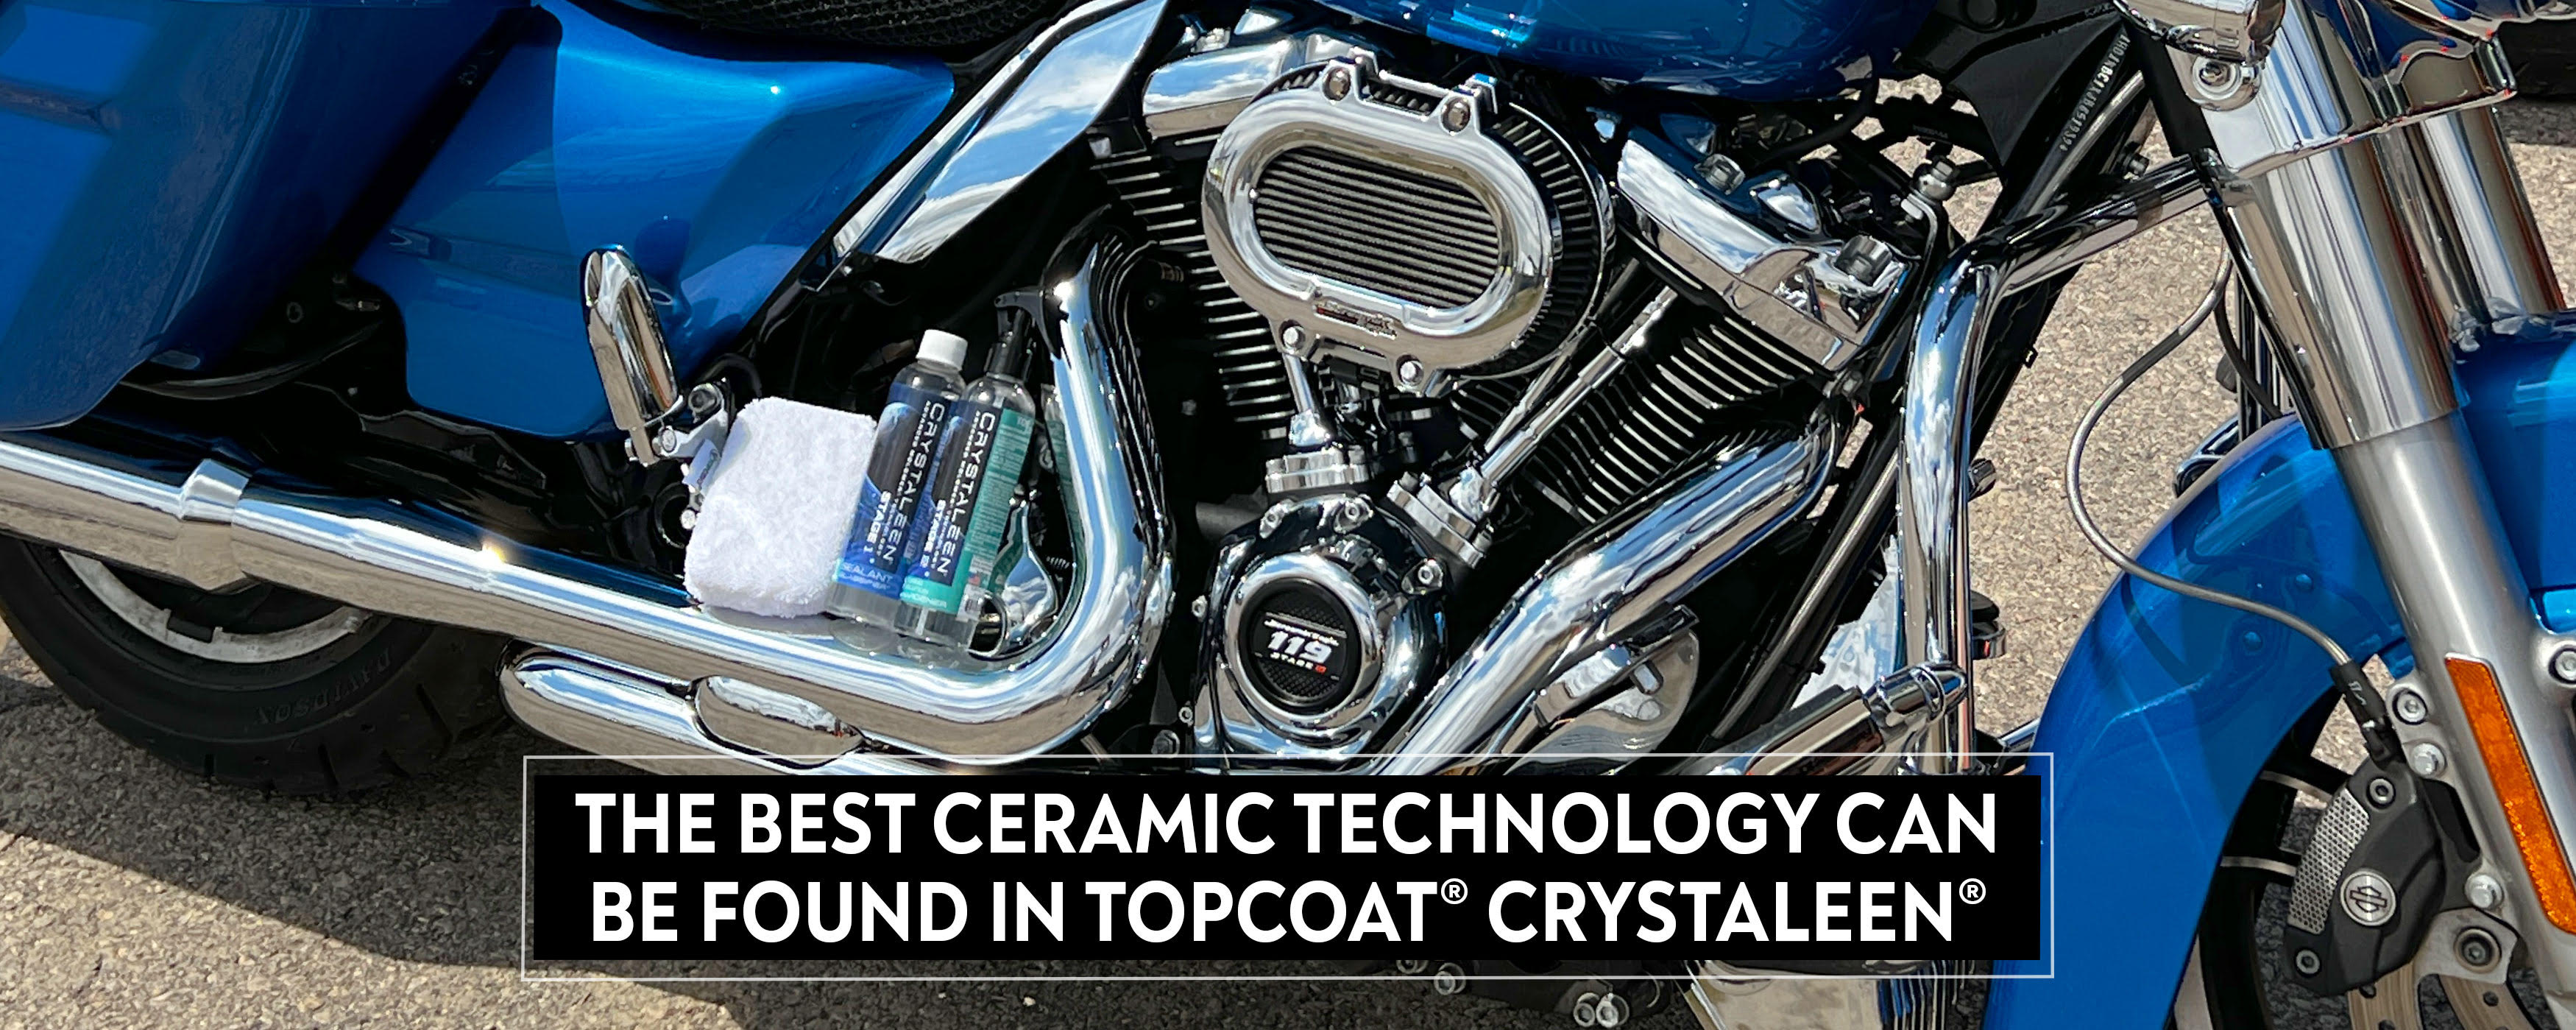 The Best Ceramic Technology Can Be Found in TopCoat® Crystaleen®